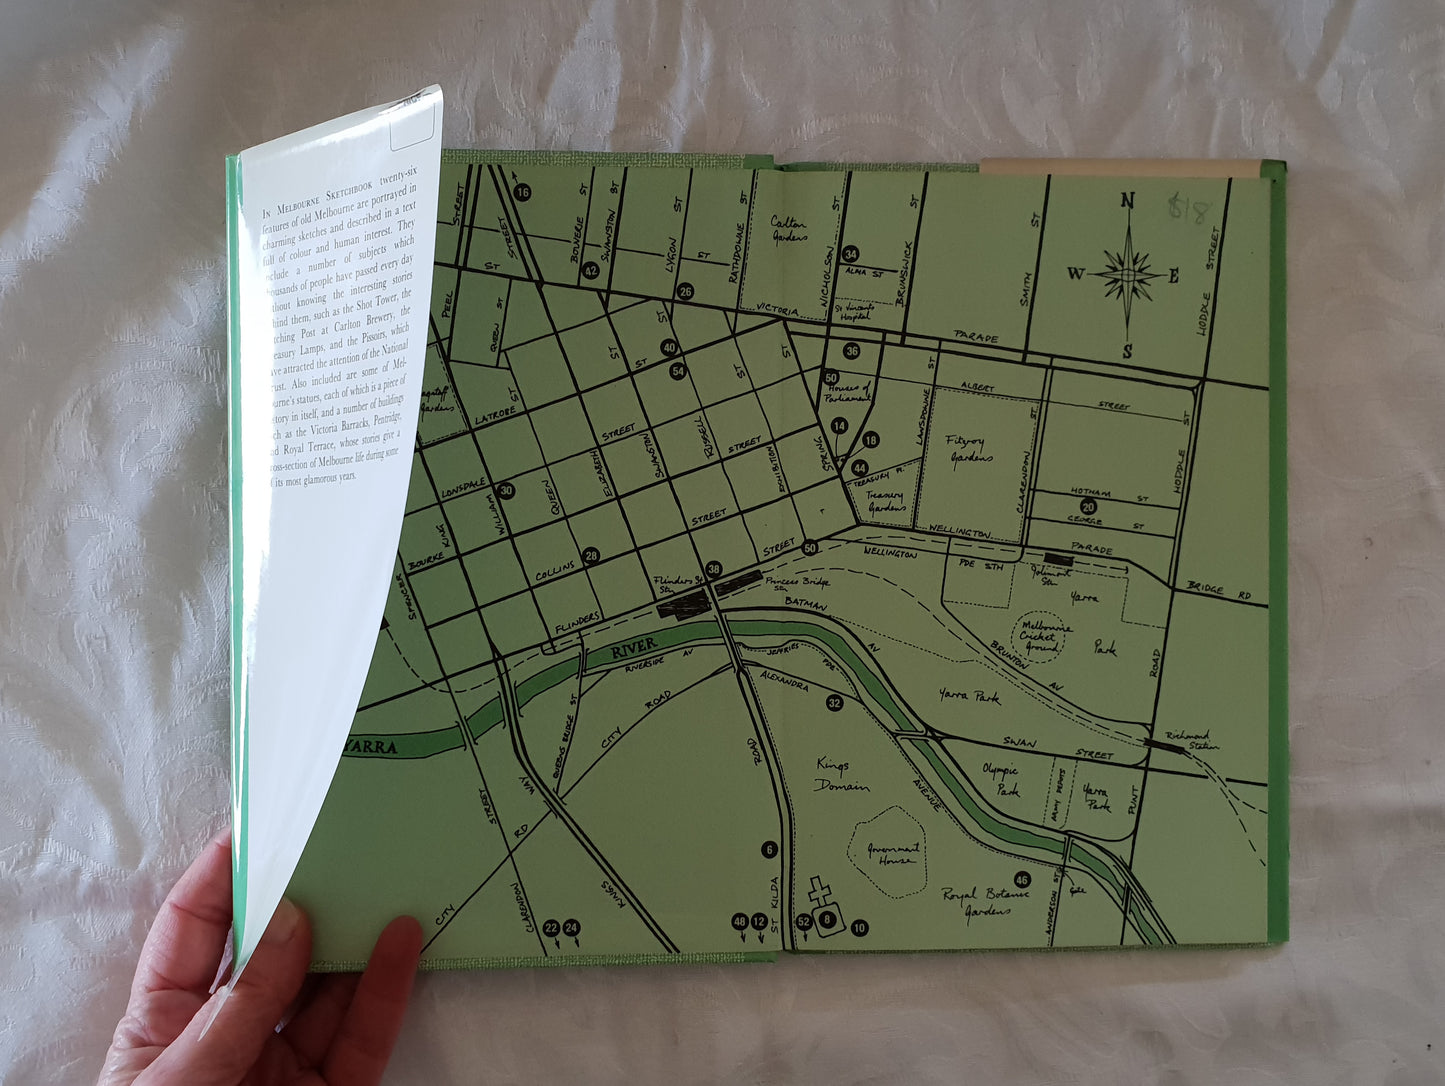 Melbourne Sketchbook by Arno Roger-Genersh and Brian Carroll